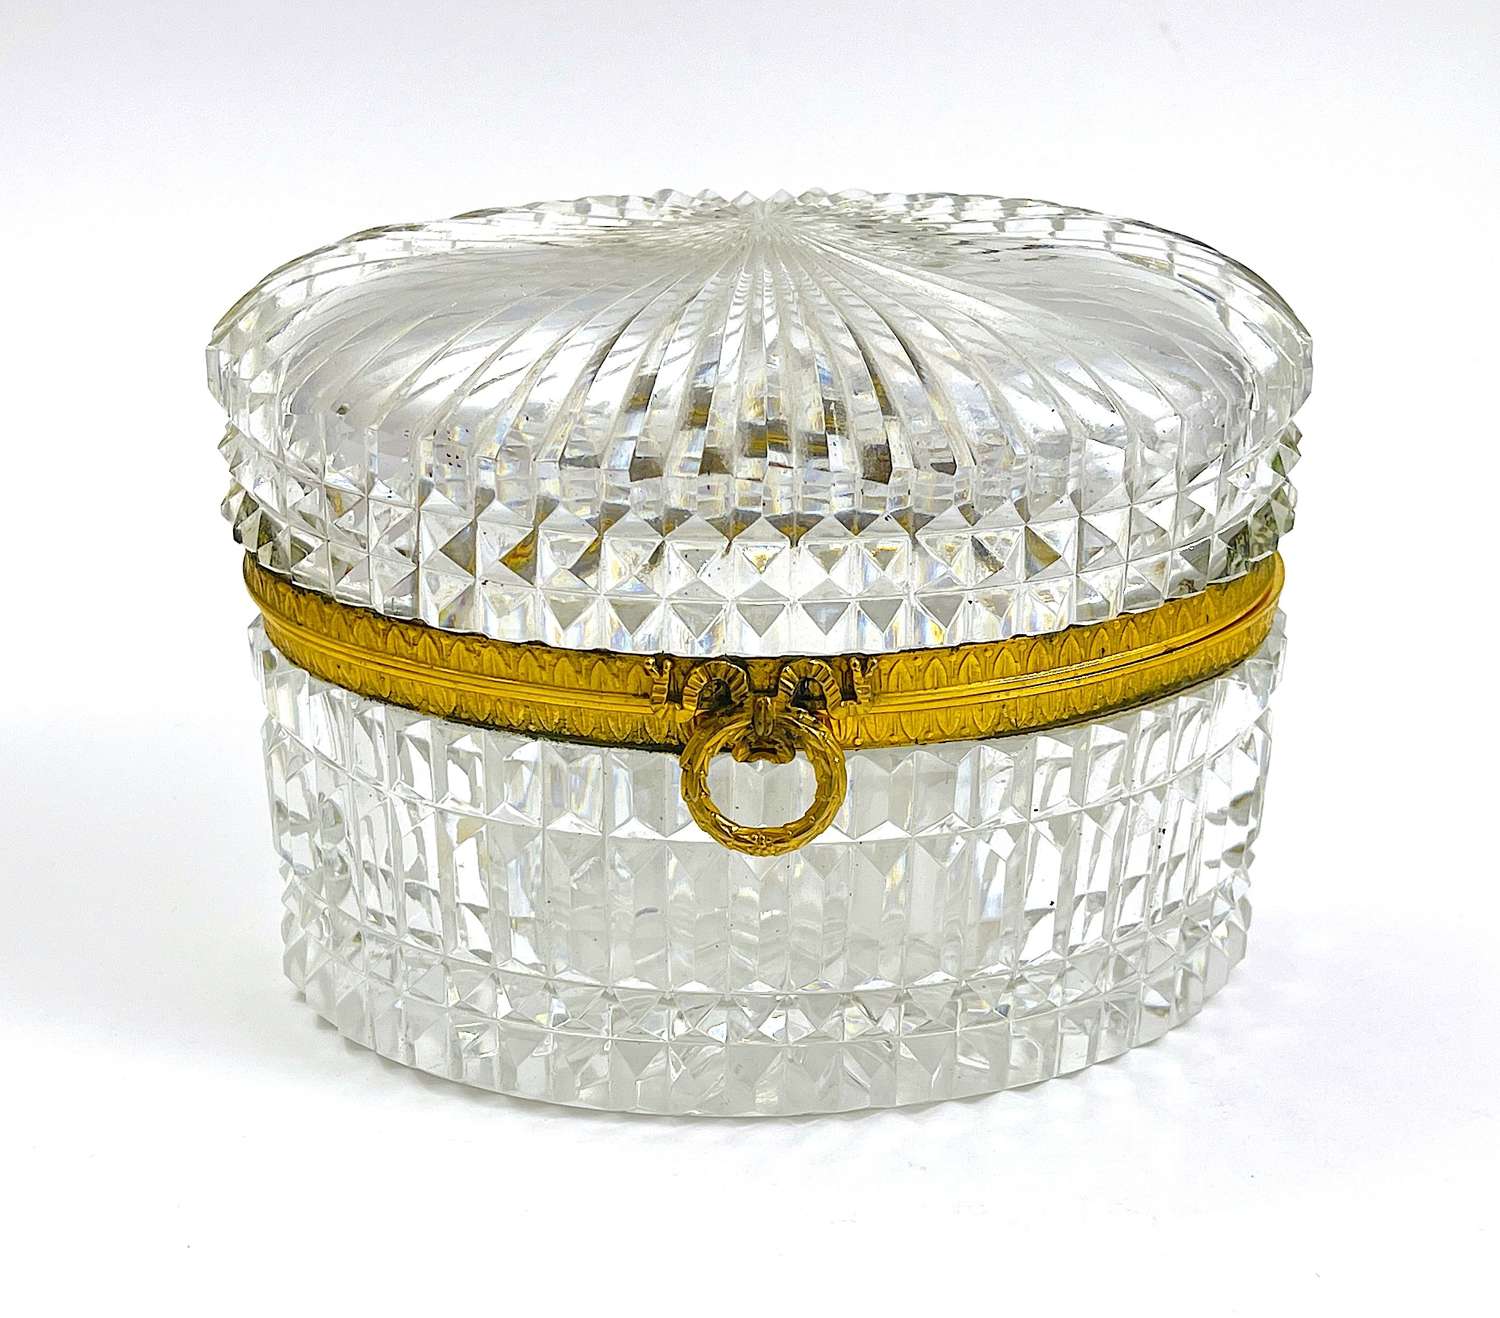 Large Elegant Antique BACCARAT Oval Cut Crystal Casket with Bow Clasp